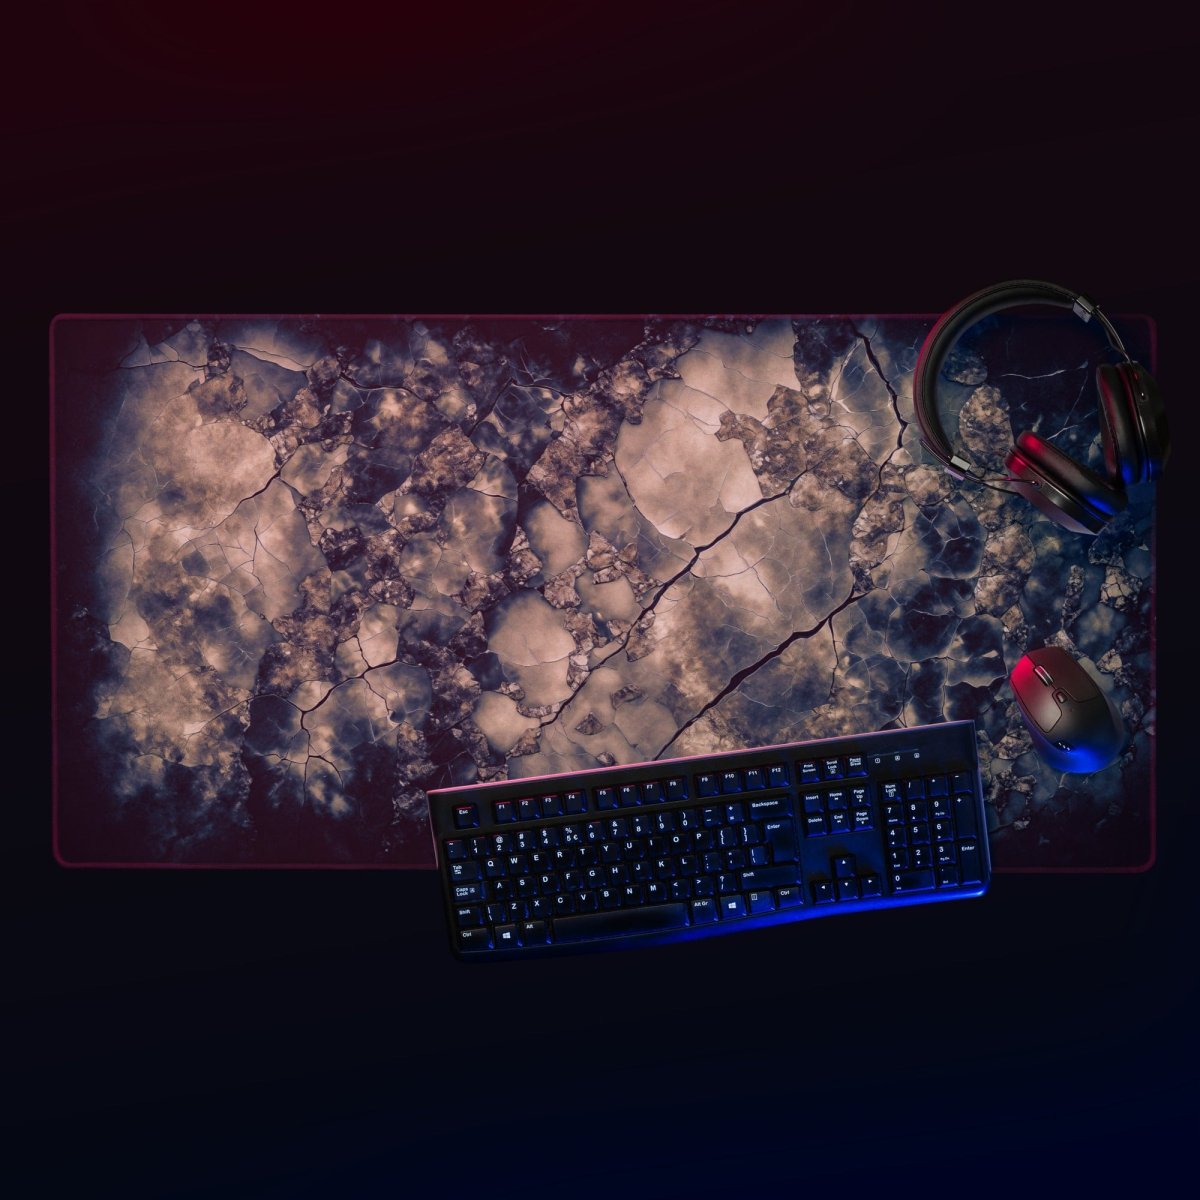 Crystalized earth - Gaming mouse pad - Ever colorful